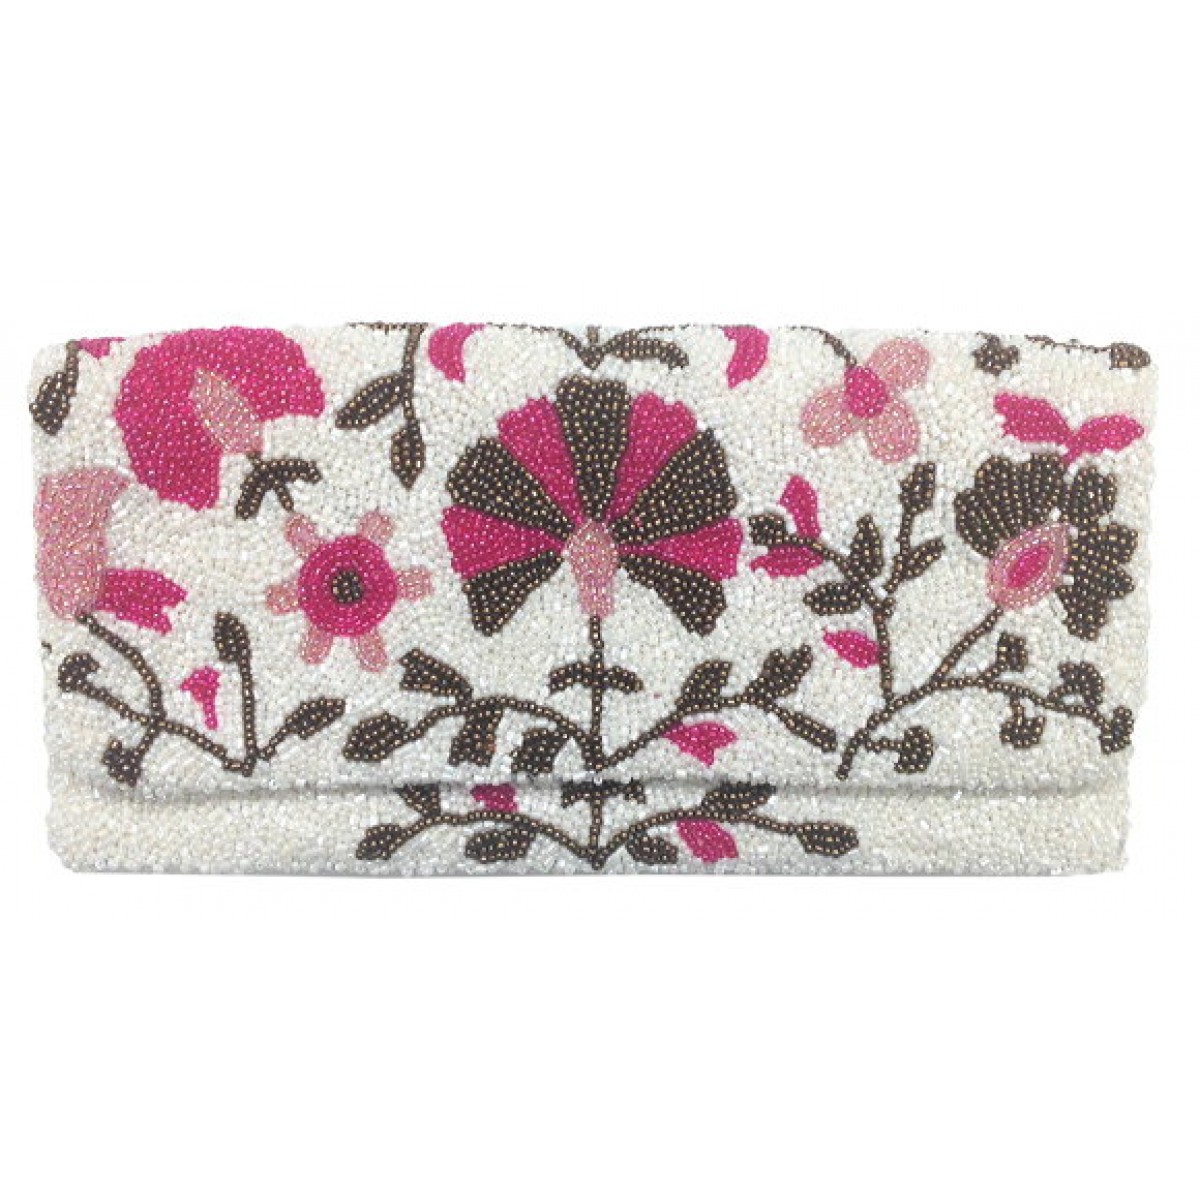 Beaded Floral Print Fold Over Clutch